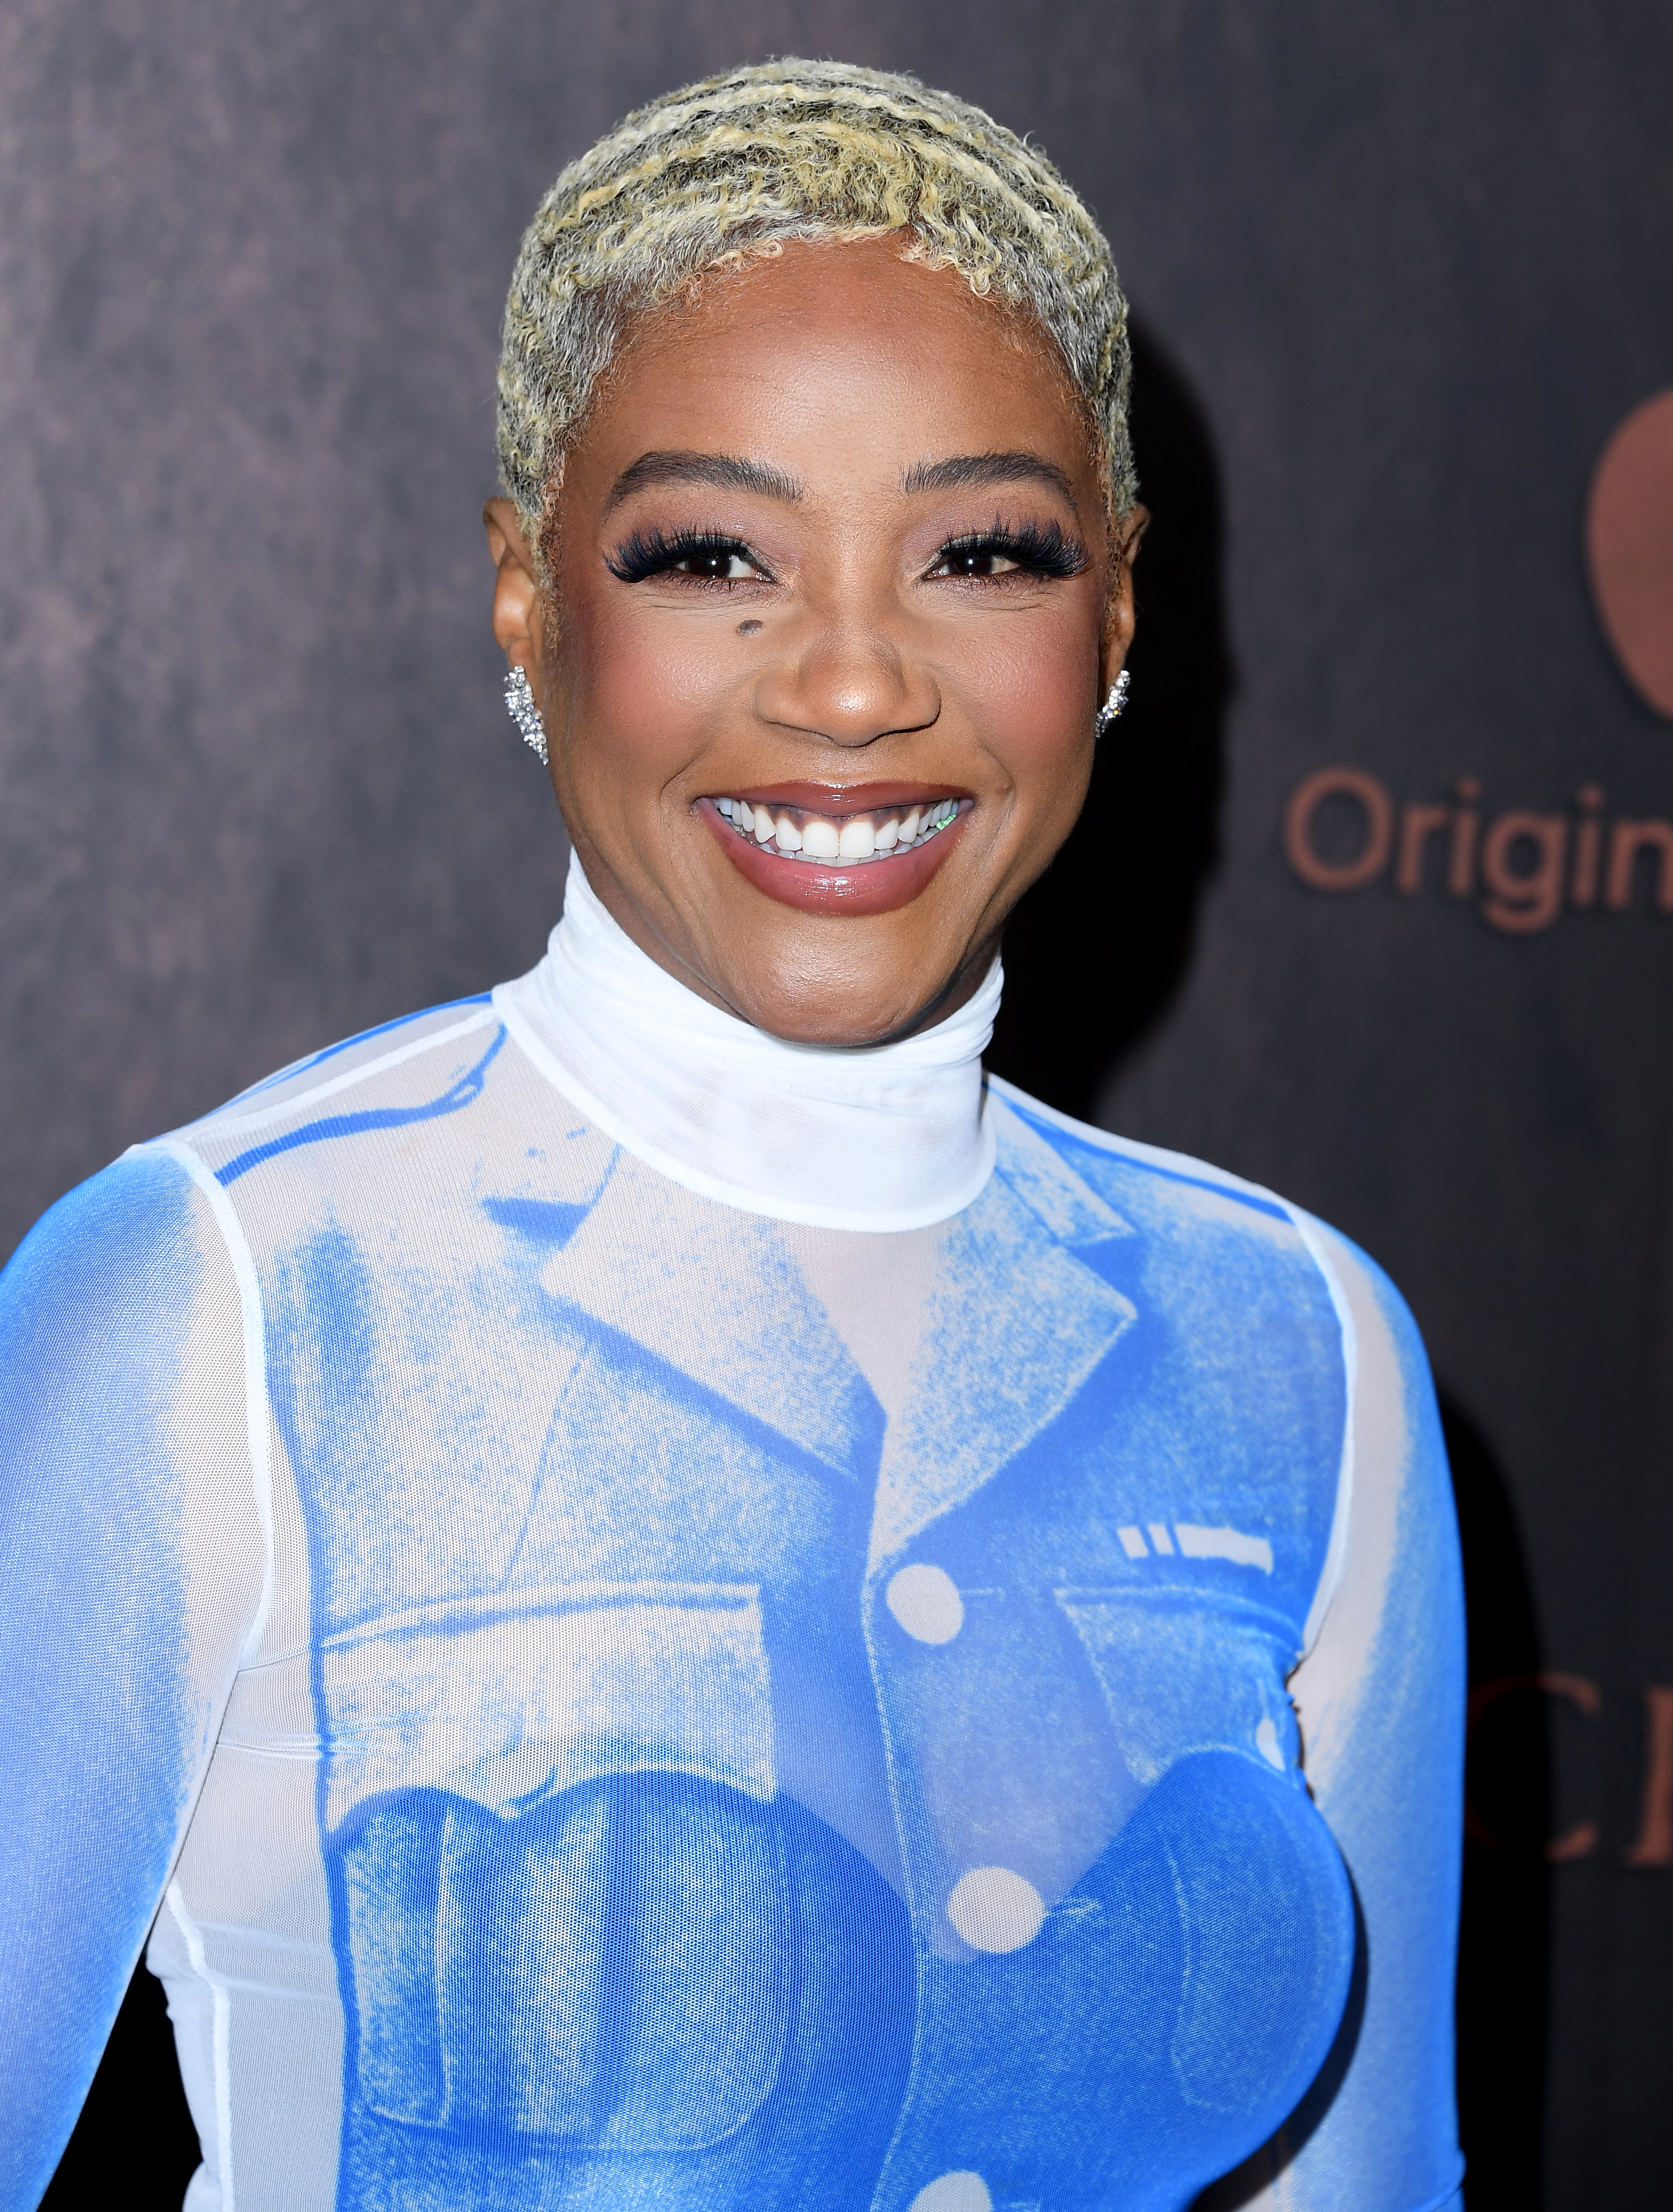 Tiffany Haddish in a graphic blue and white suit, smiling on the red carpet